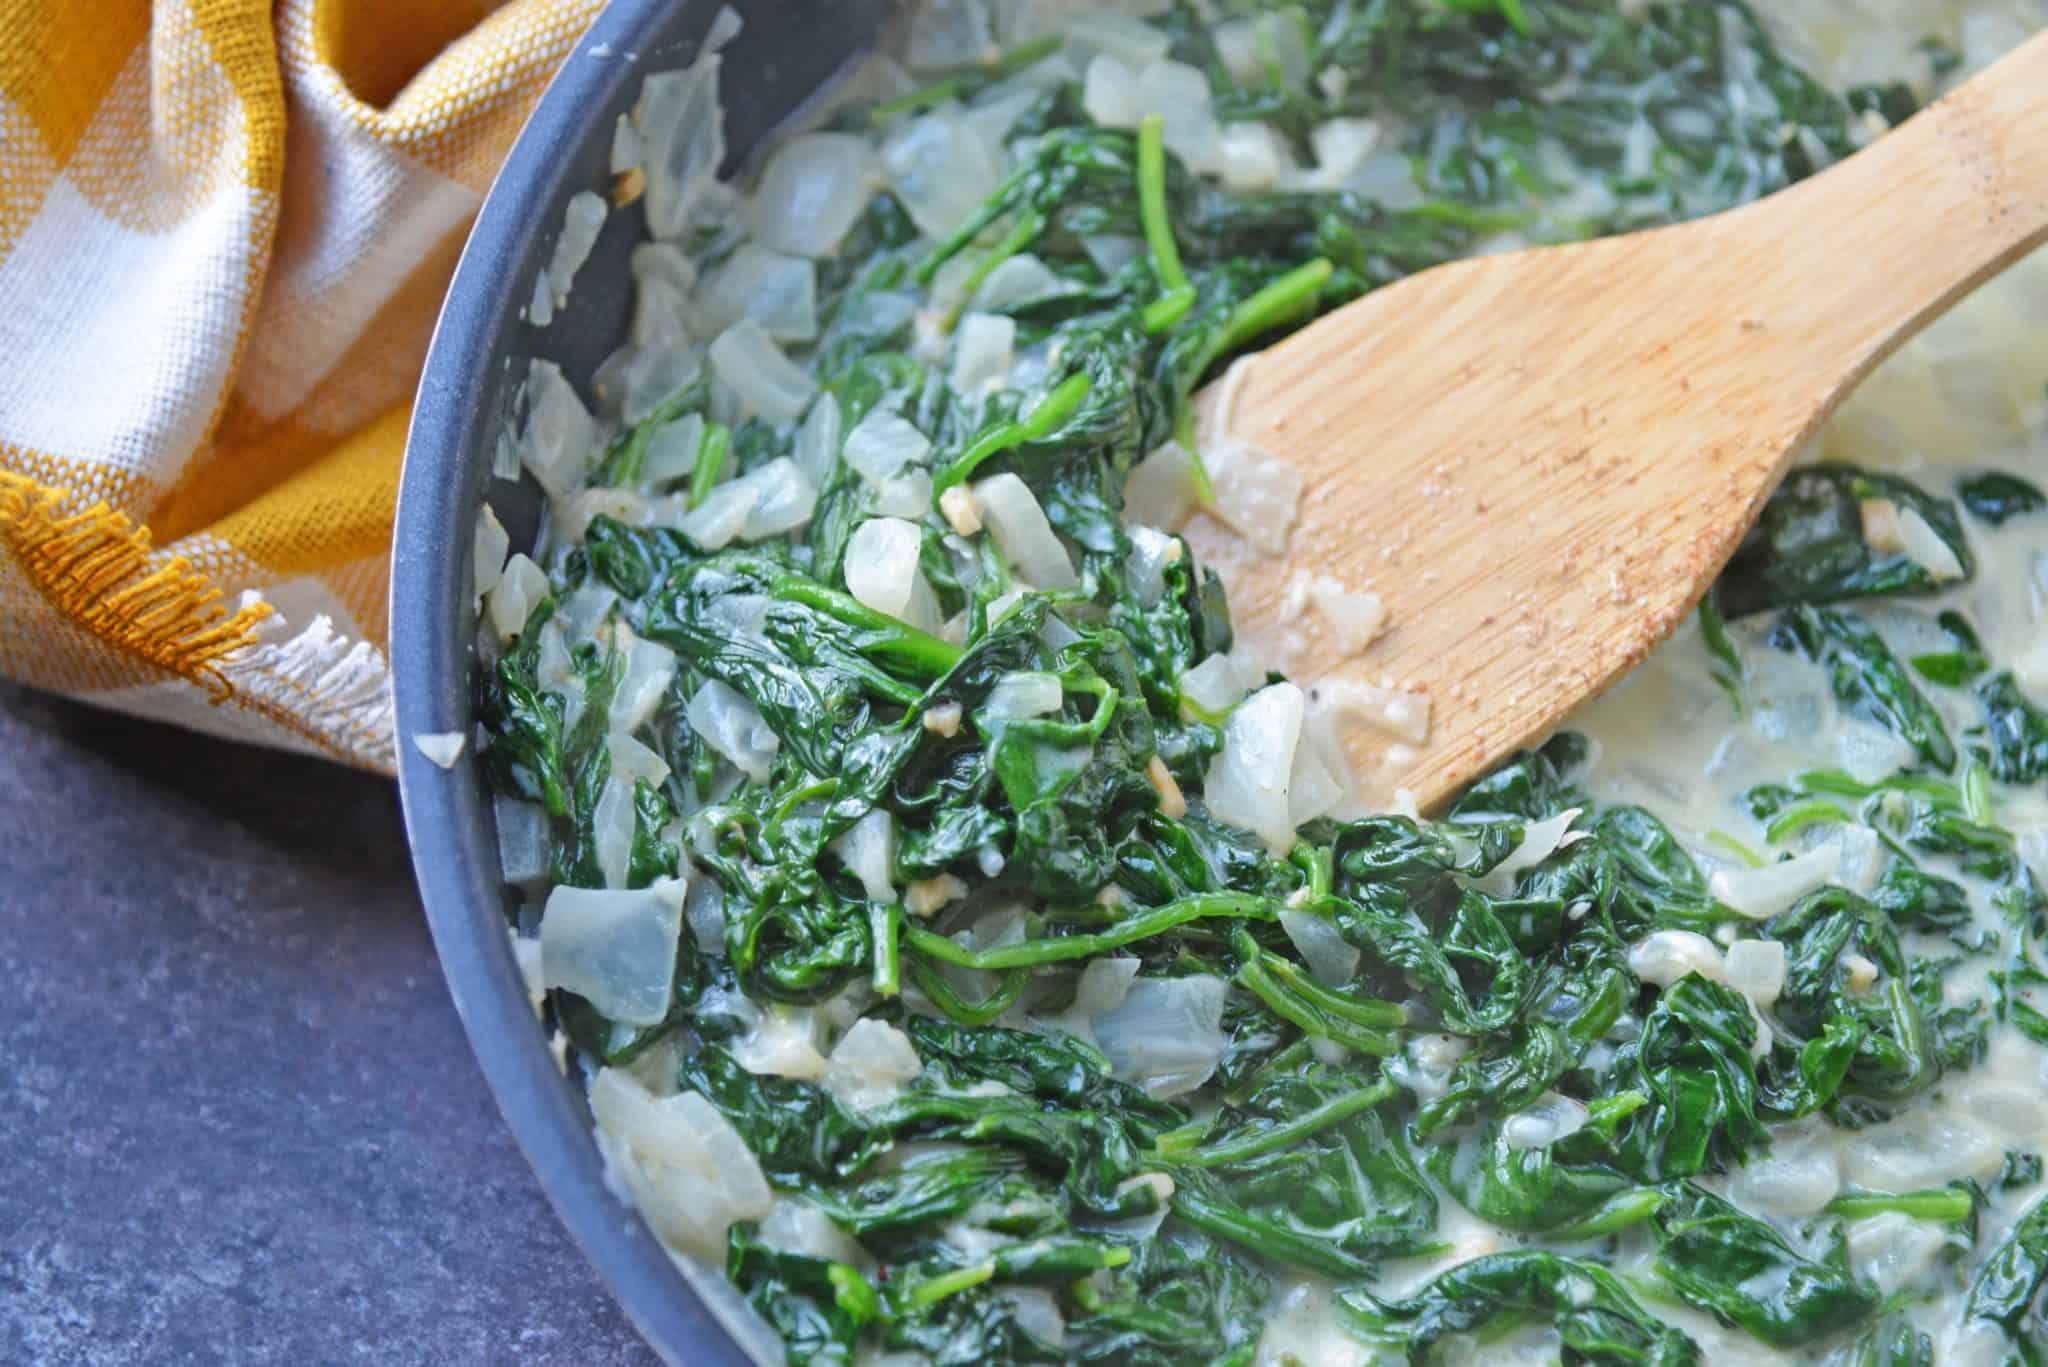 If you are wondering how to make creamed spinach, look no further! This easy creamed spinach recipe makes the perfect side dish to any meal. #creamedspinachrecipe #easycreamedspinach www.savoryexperiments.com